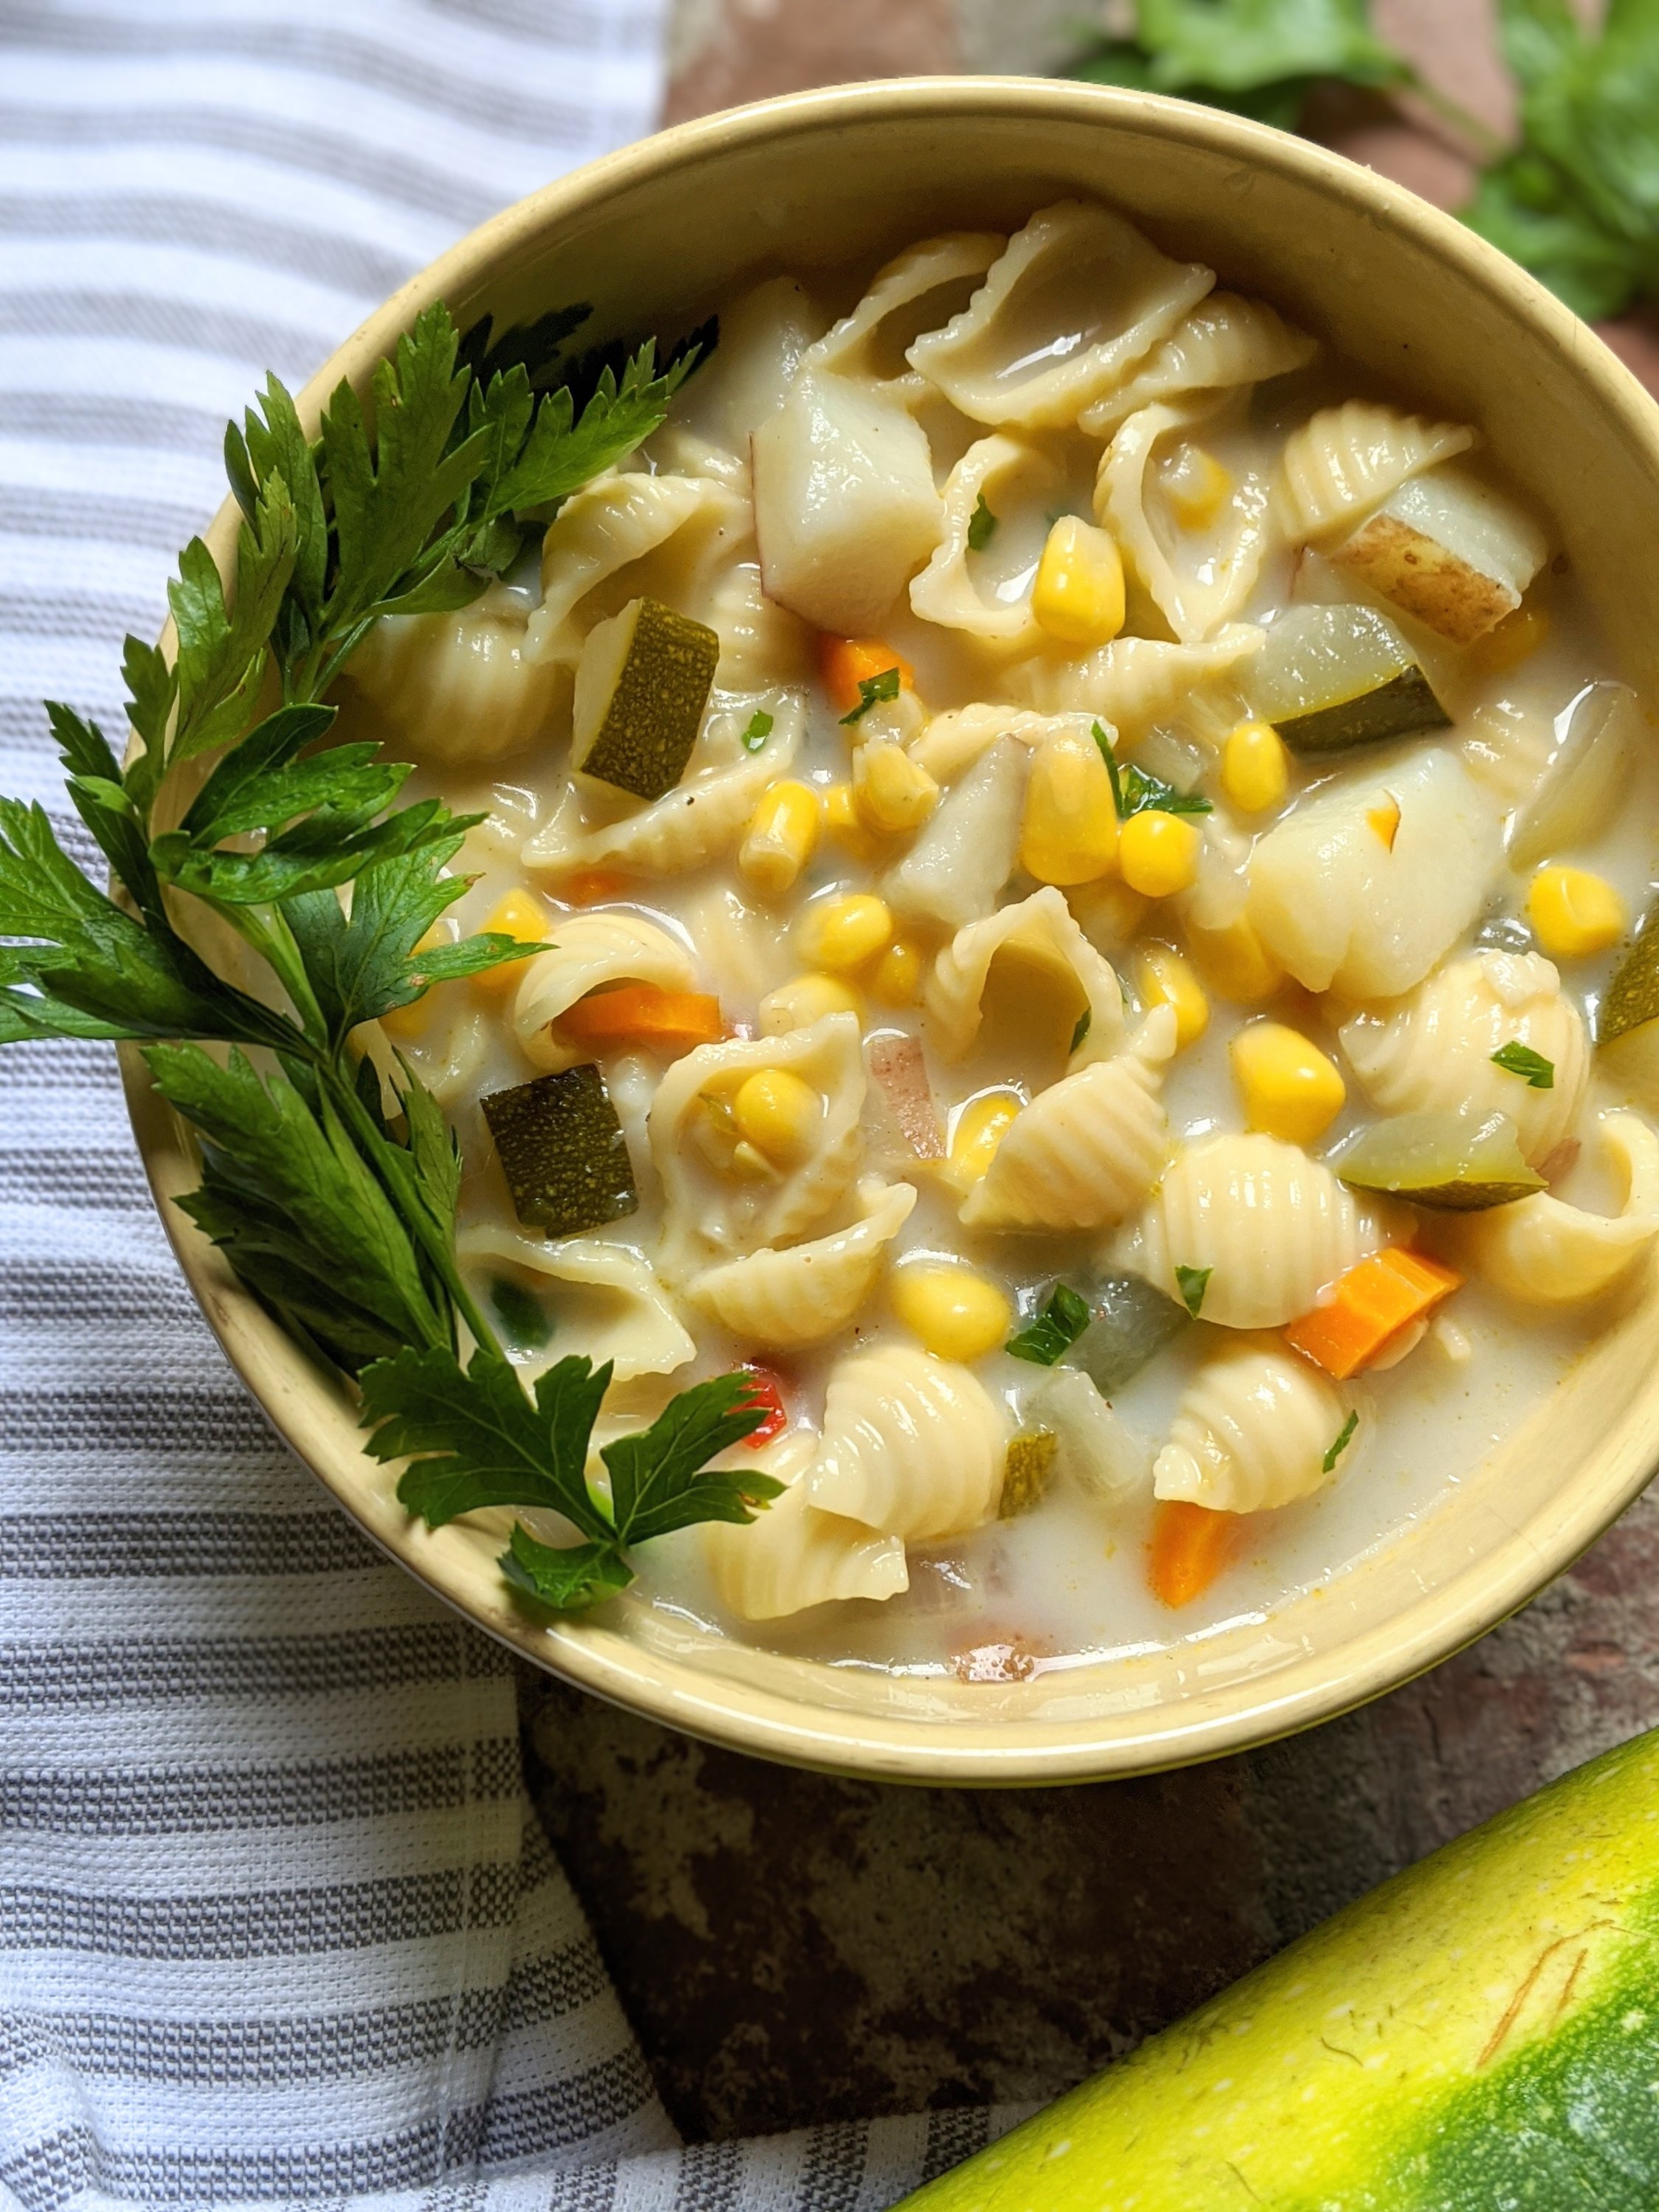 dairy free chowder recipe vegan tluten free vegetarian meatless corn and zucchini soup recipe with pasta no dairy garden vegetables